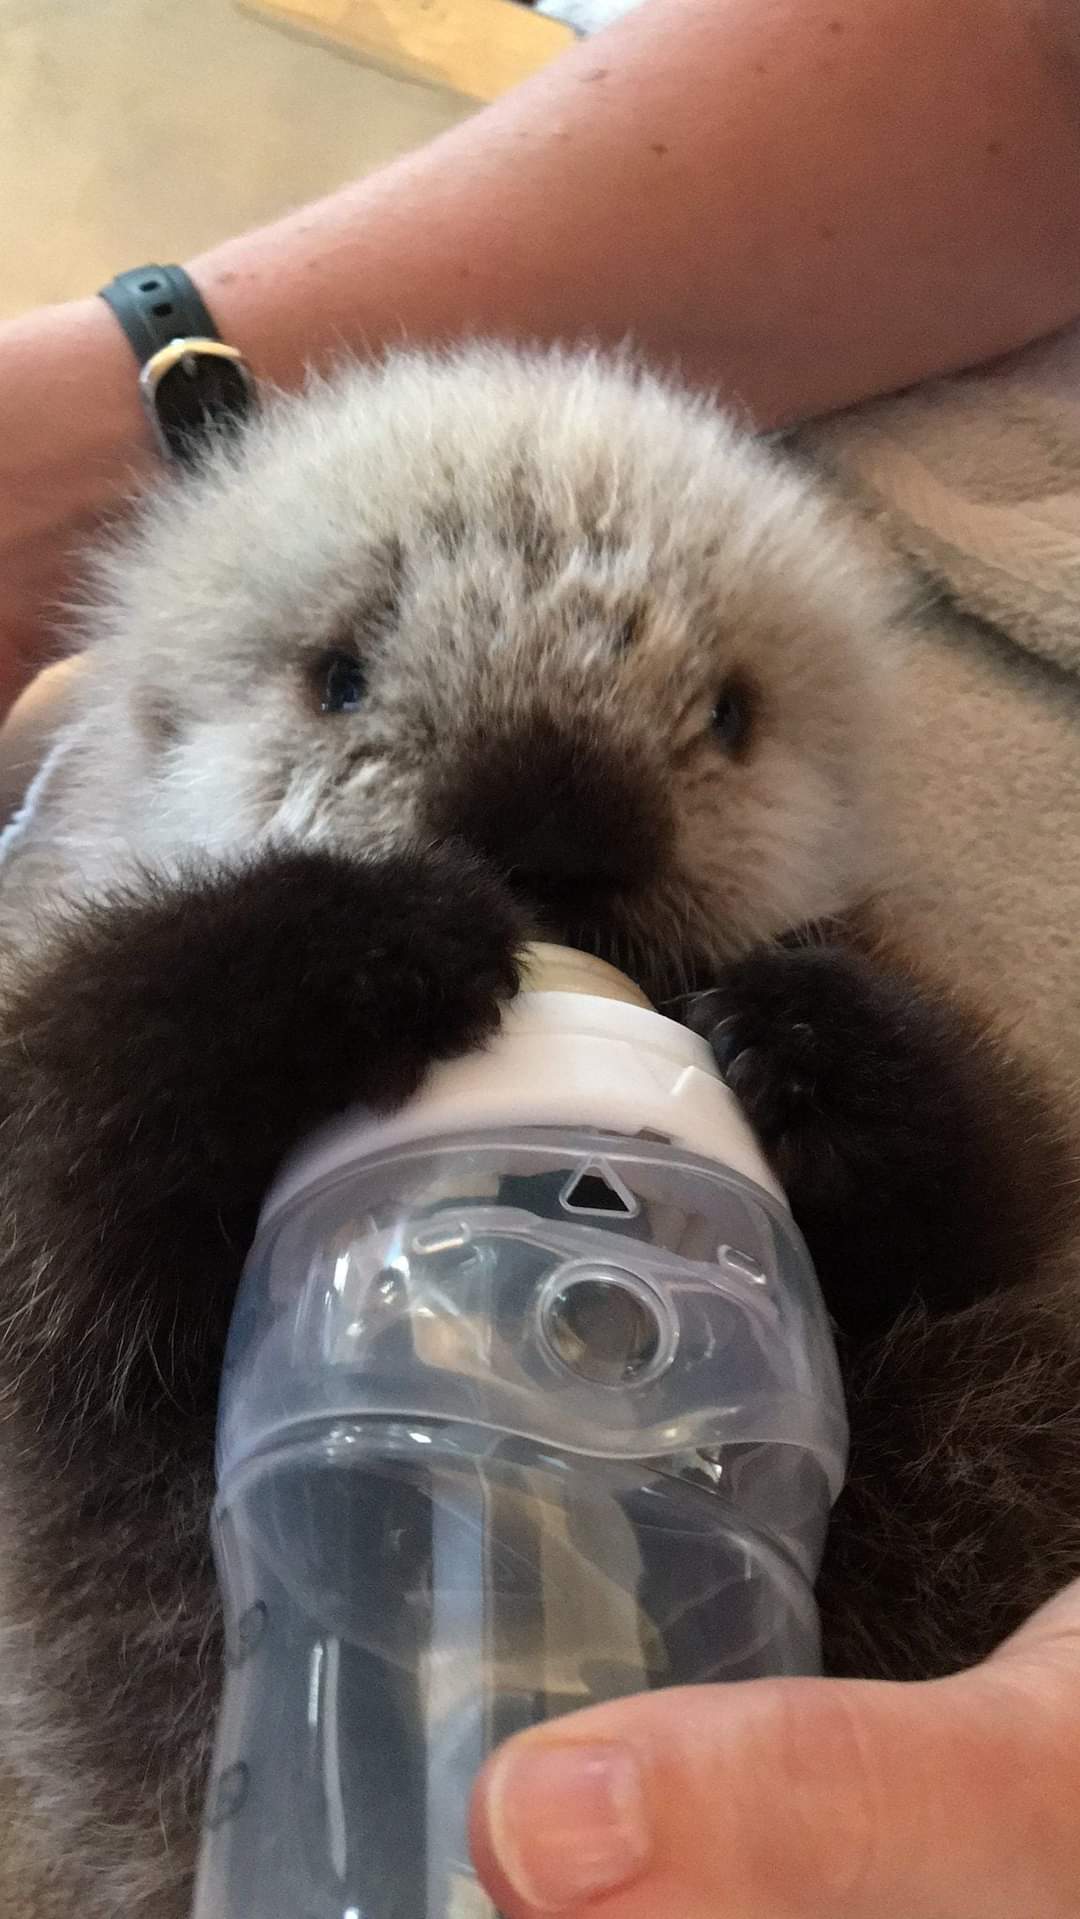 fuzzy baby otter drinking milk from a bottle